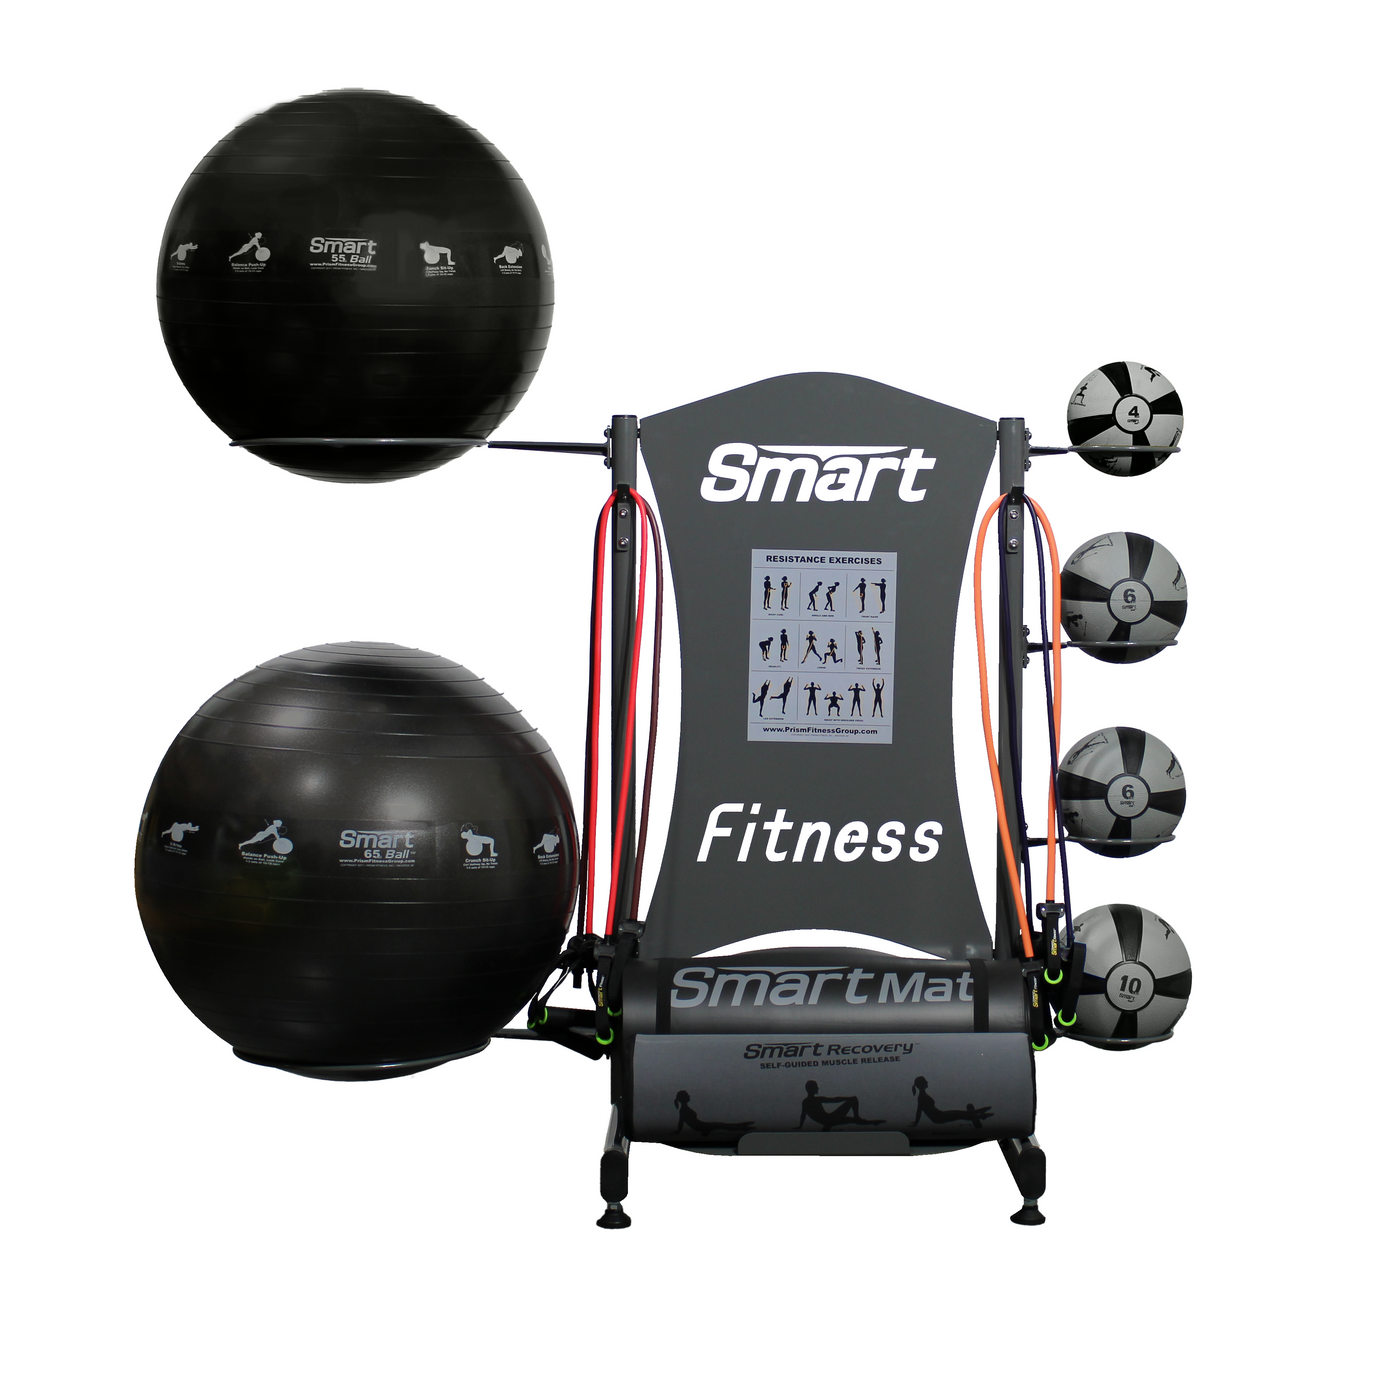 FUNCTIONAL TRAINING & ACCESSORY PACKAGES